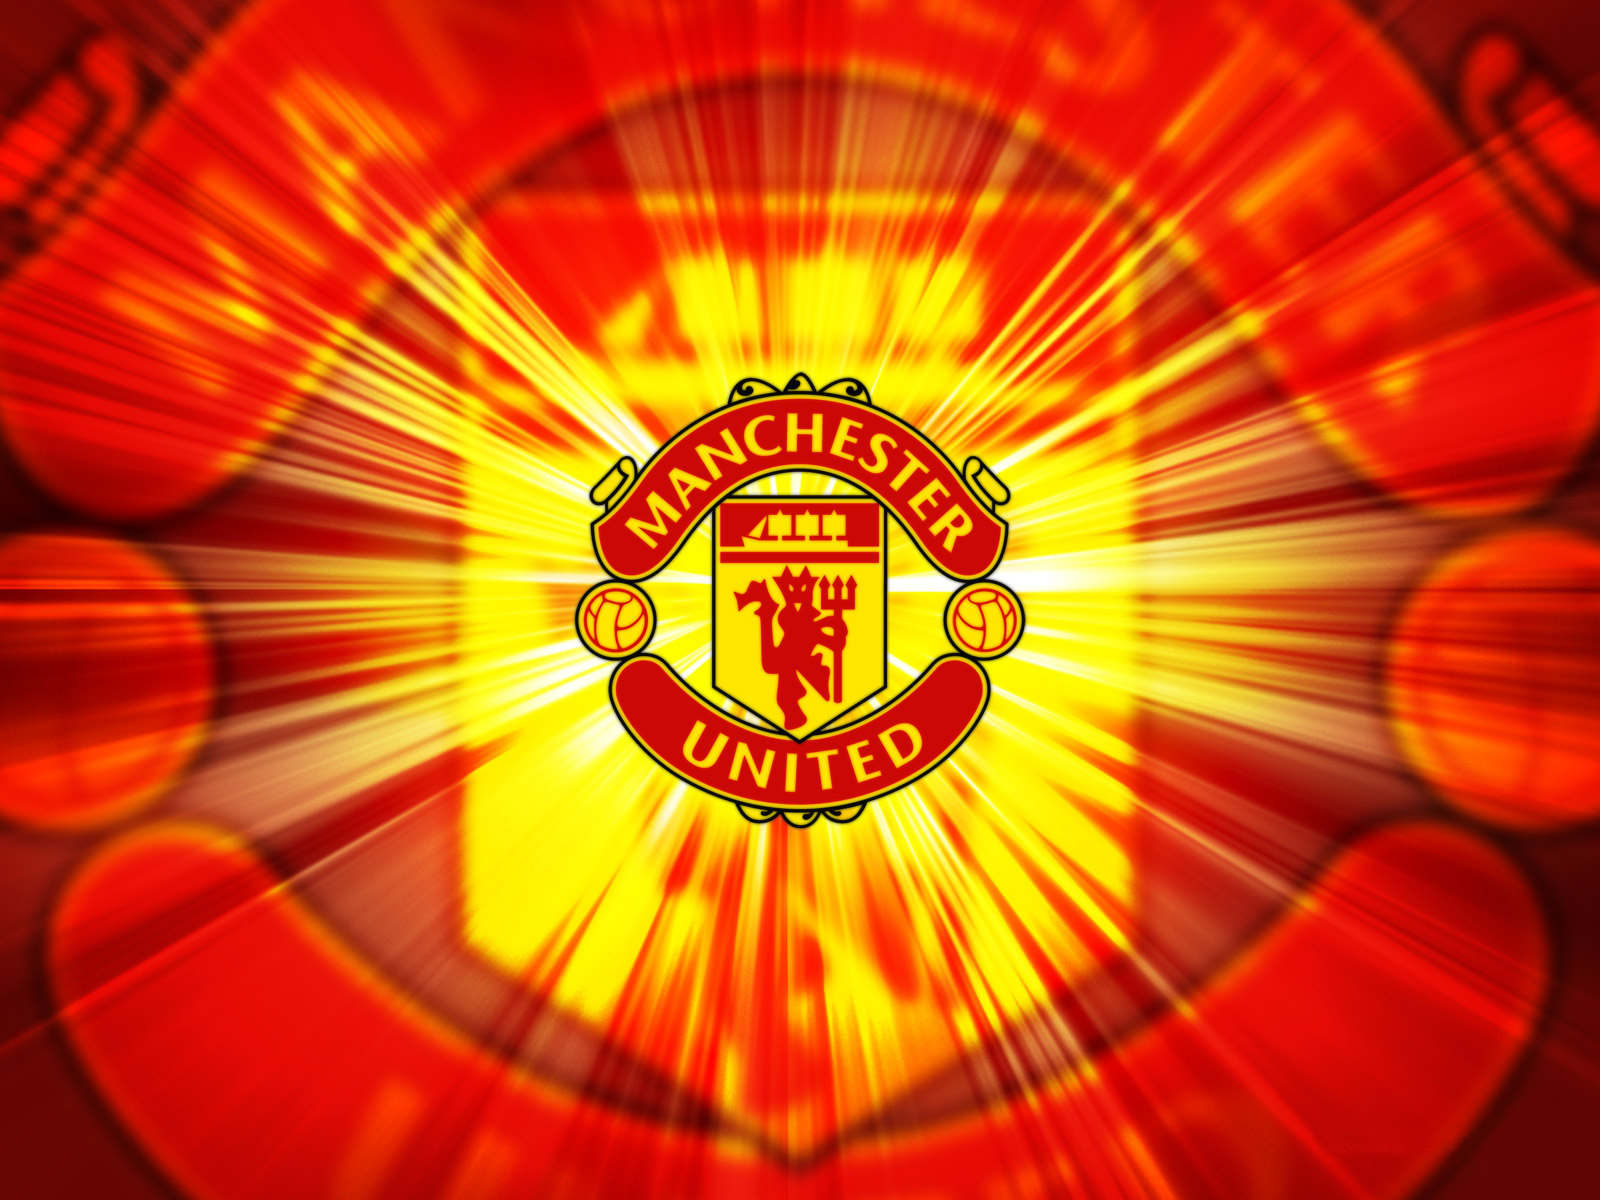 Seven Share Manchester United Wallpaper Glory That